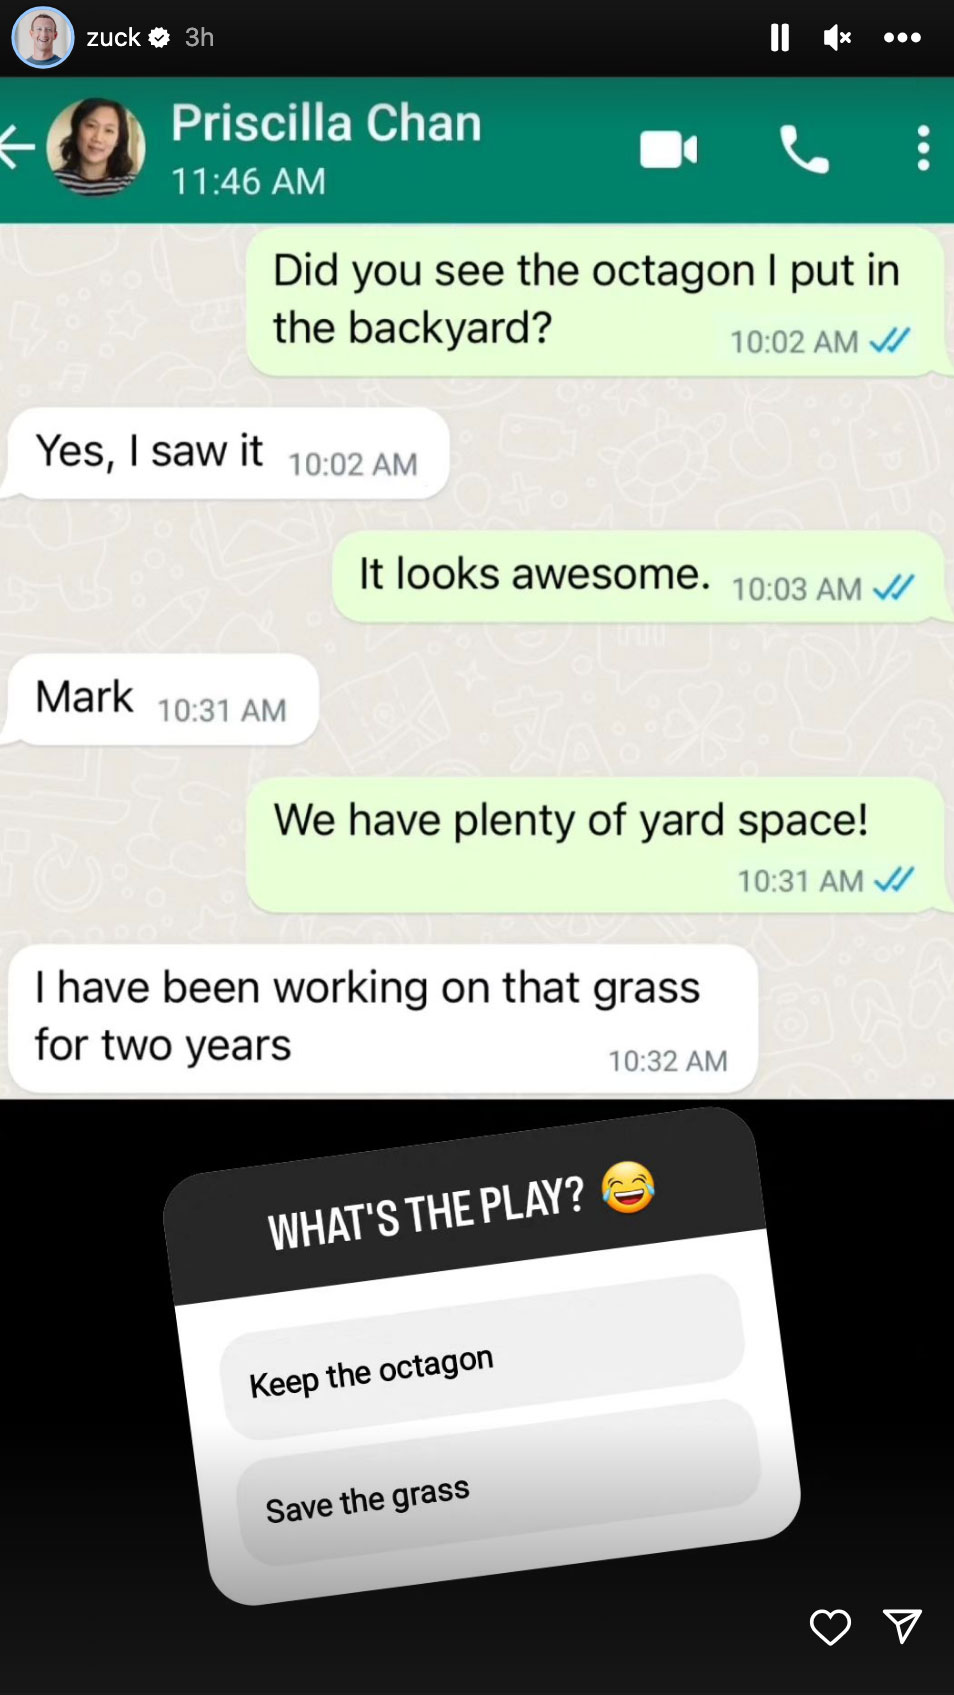 The Meta chief shared their text messages on Instagram